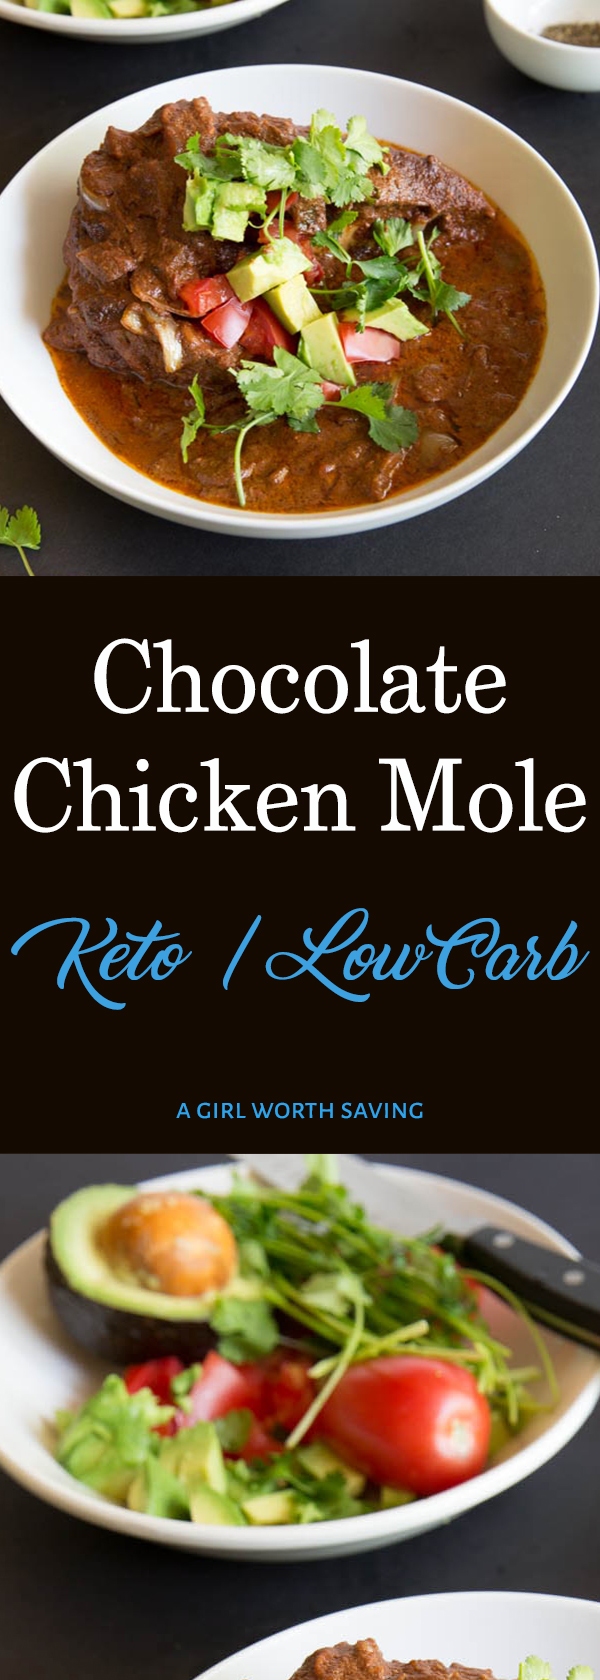 Chocolate, cinnamon and almond butter make this chicken mole authentic as well as low carb and Keto! This Mexican recipe is smokey and slightly bitter.